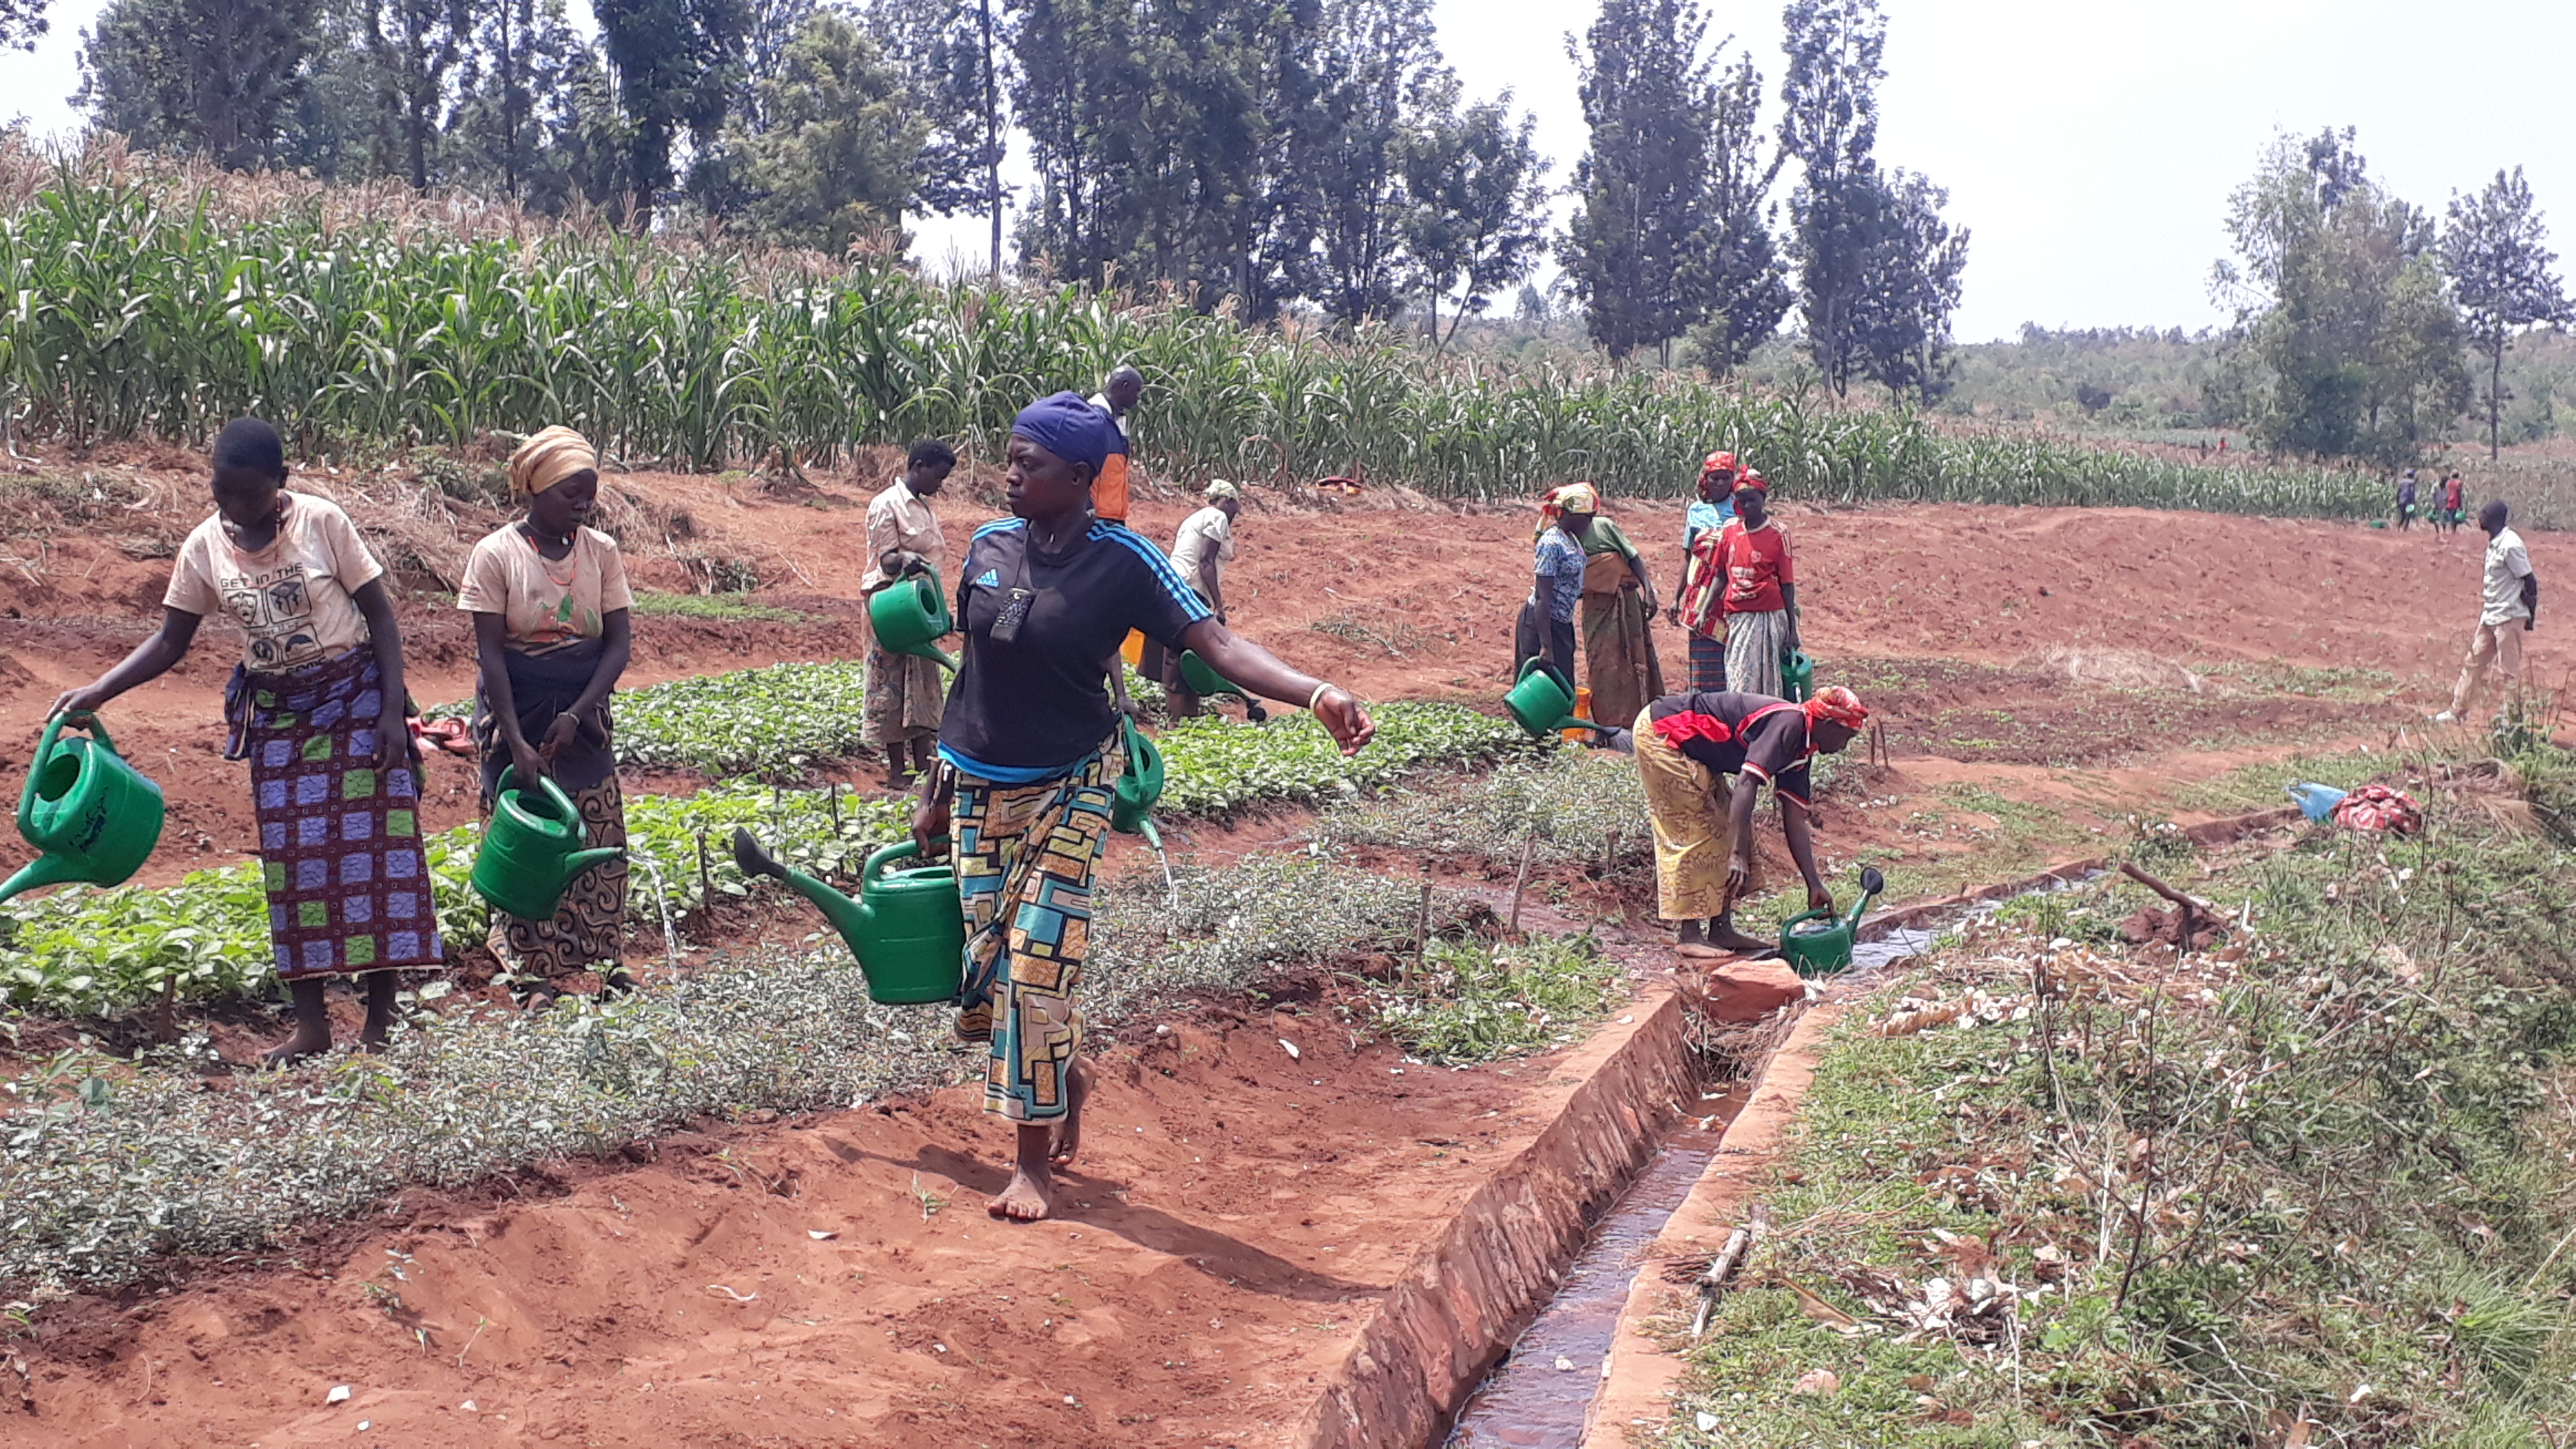 Canals bring water down from Nyamurenge Hill to 80 ha of farms below. The new irrigation system has allowed farmers to grow staple crops, like maize and beans, during the dry season.